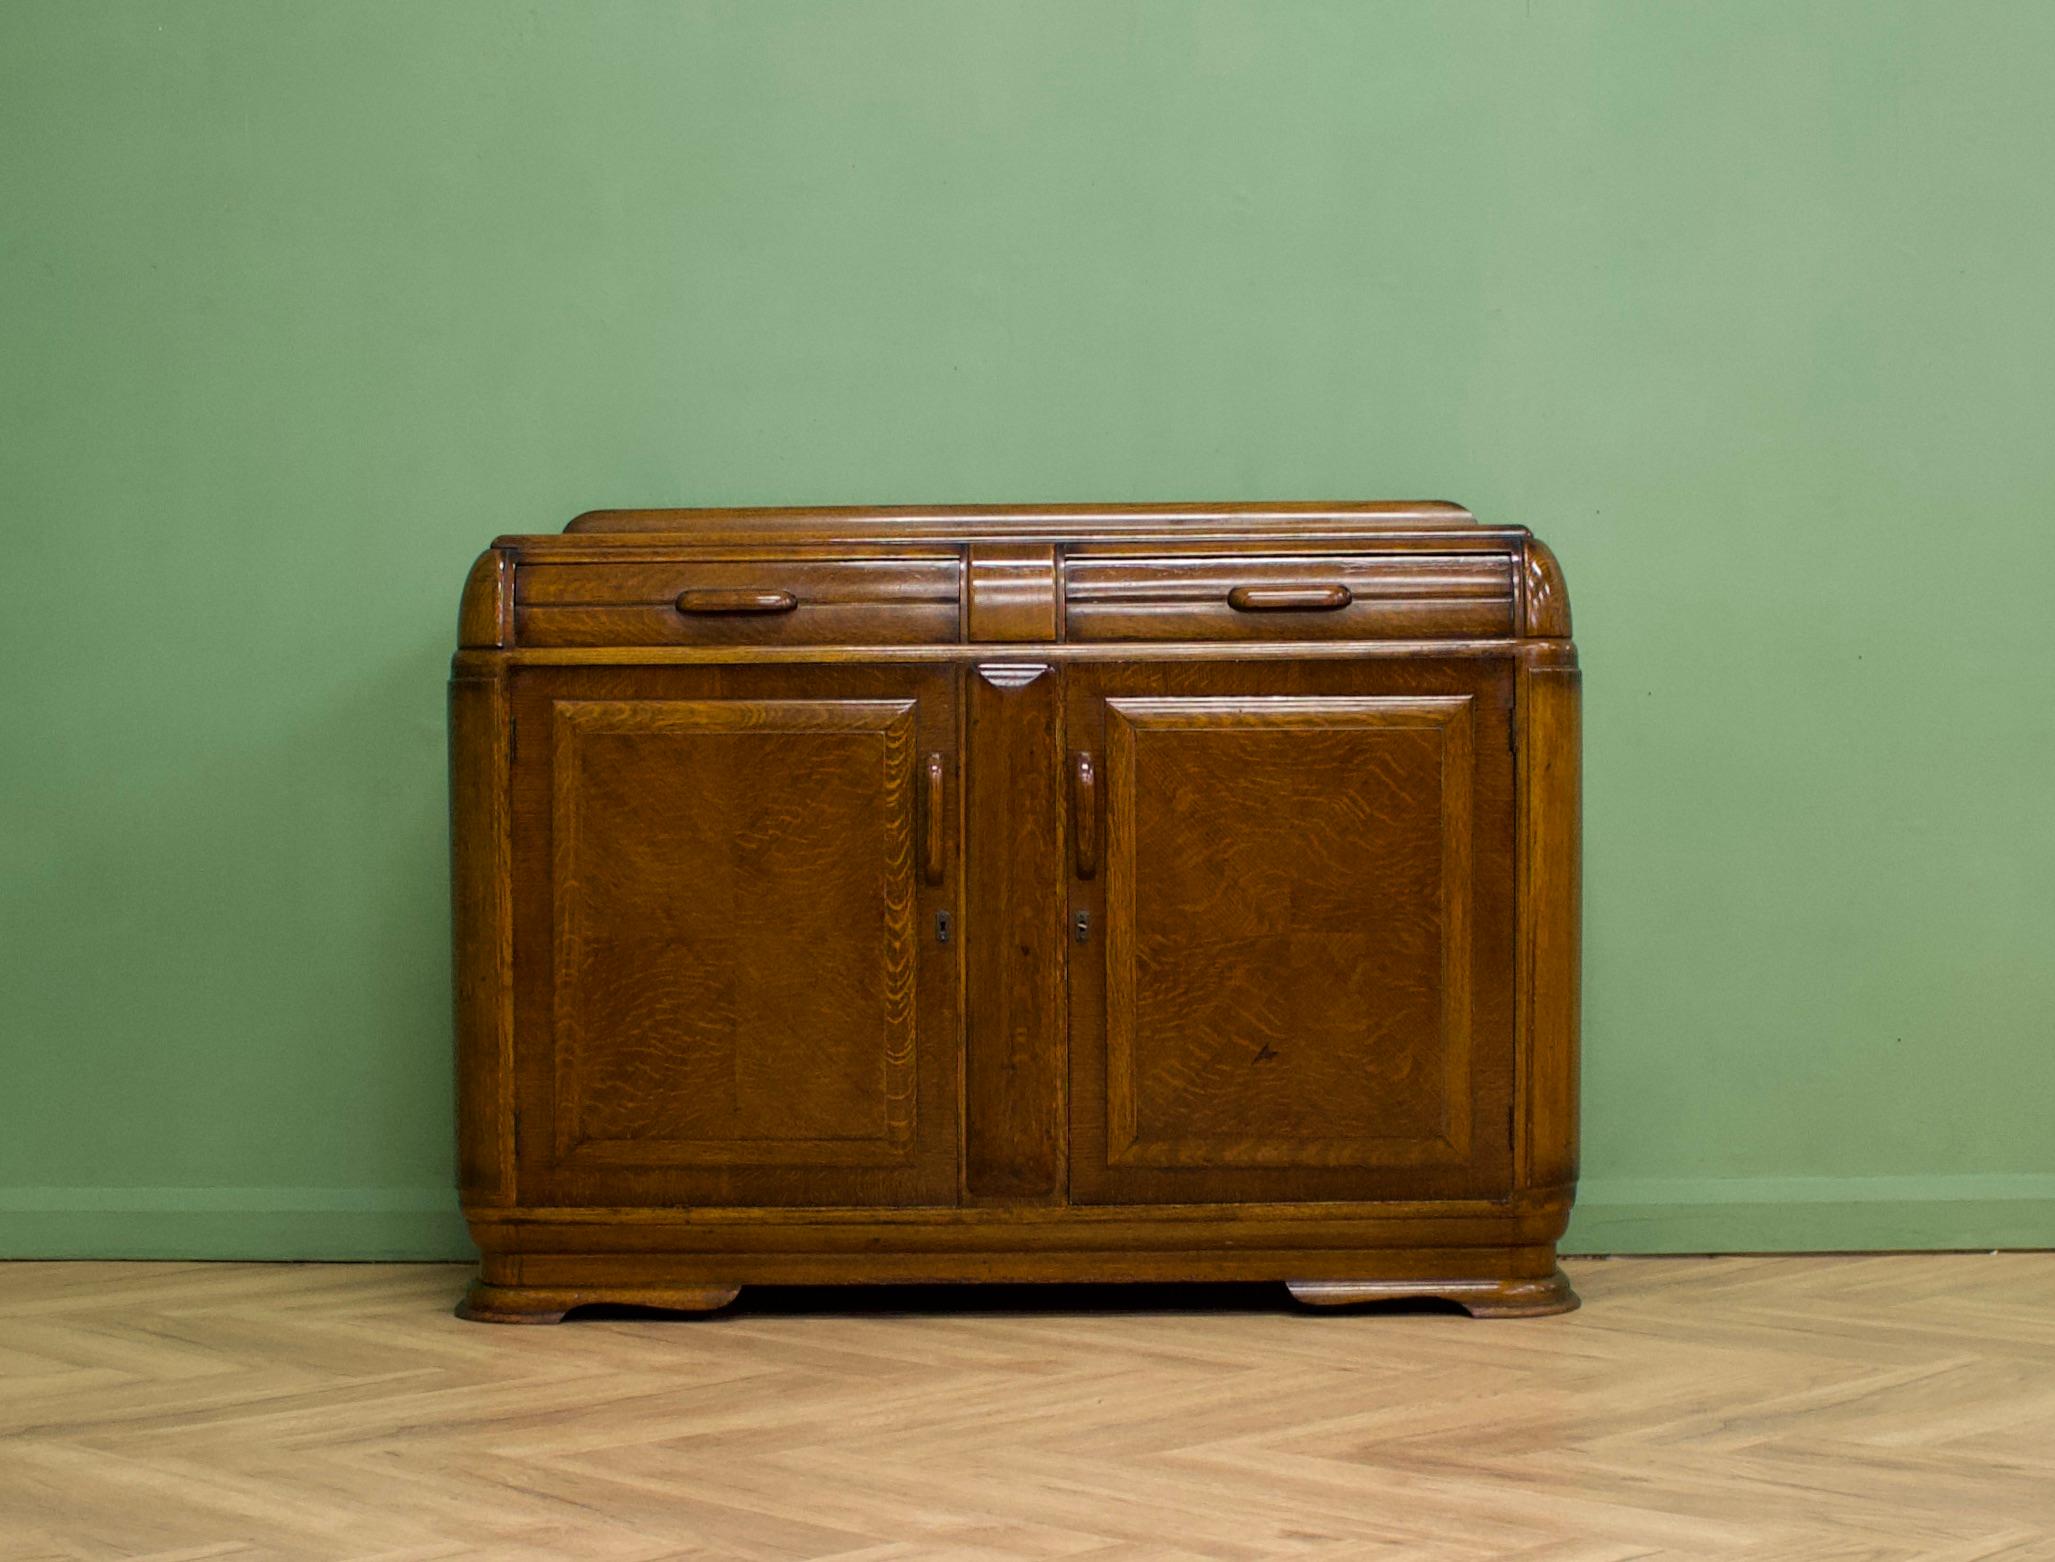 A high quality, dark oak Art Deco sideboard, circa 1930's-1940s
This piece is heavy and sturdy 
 
Featuring two drawers and two cupboards with shelves

